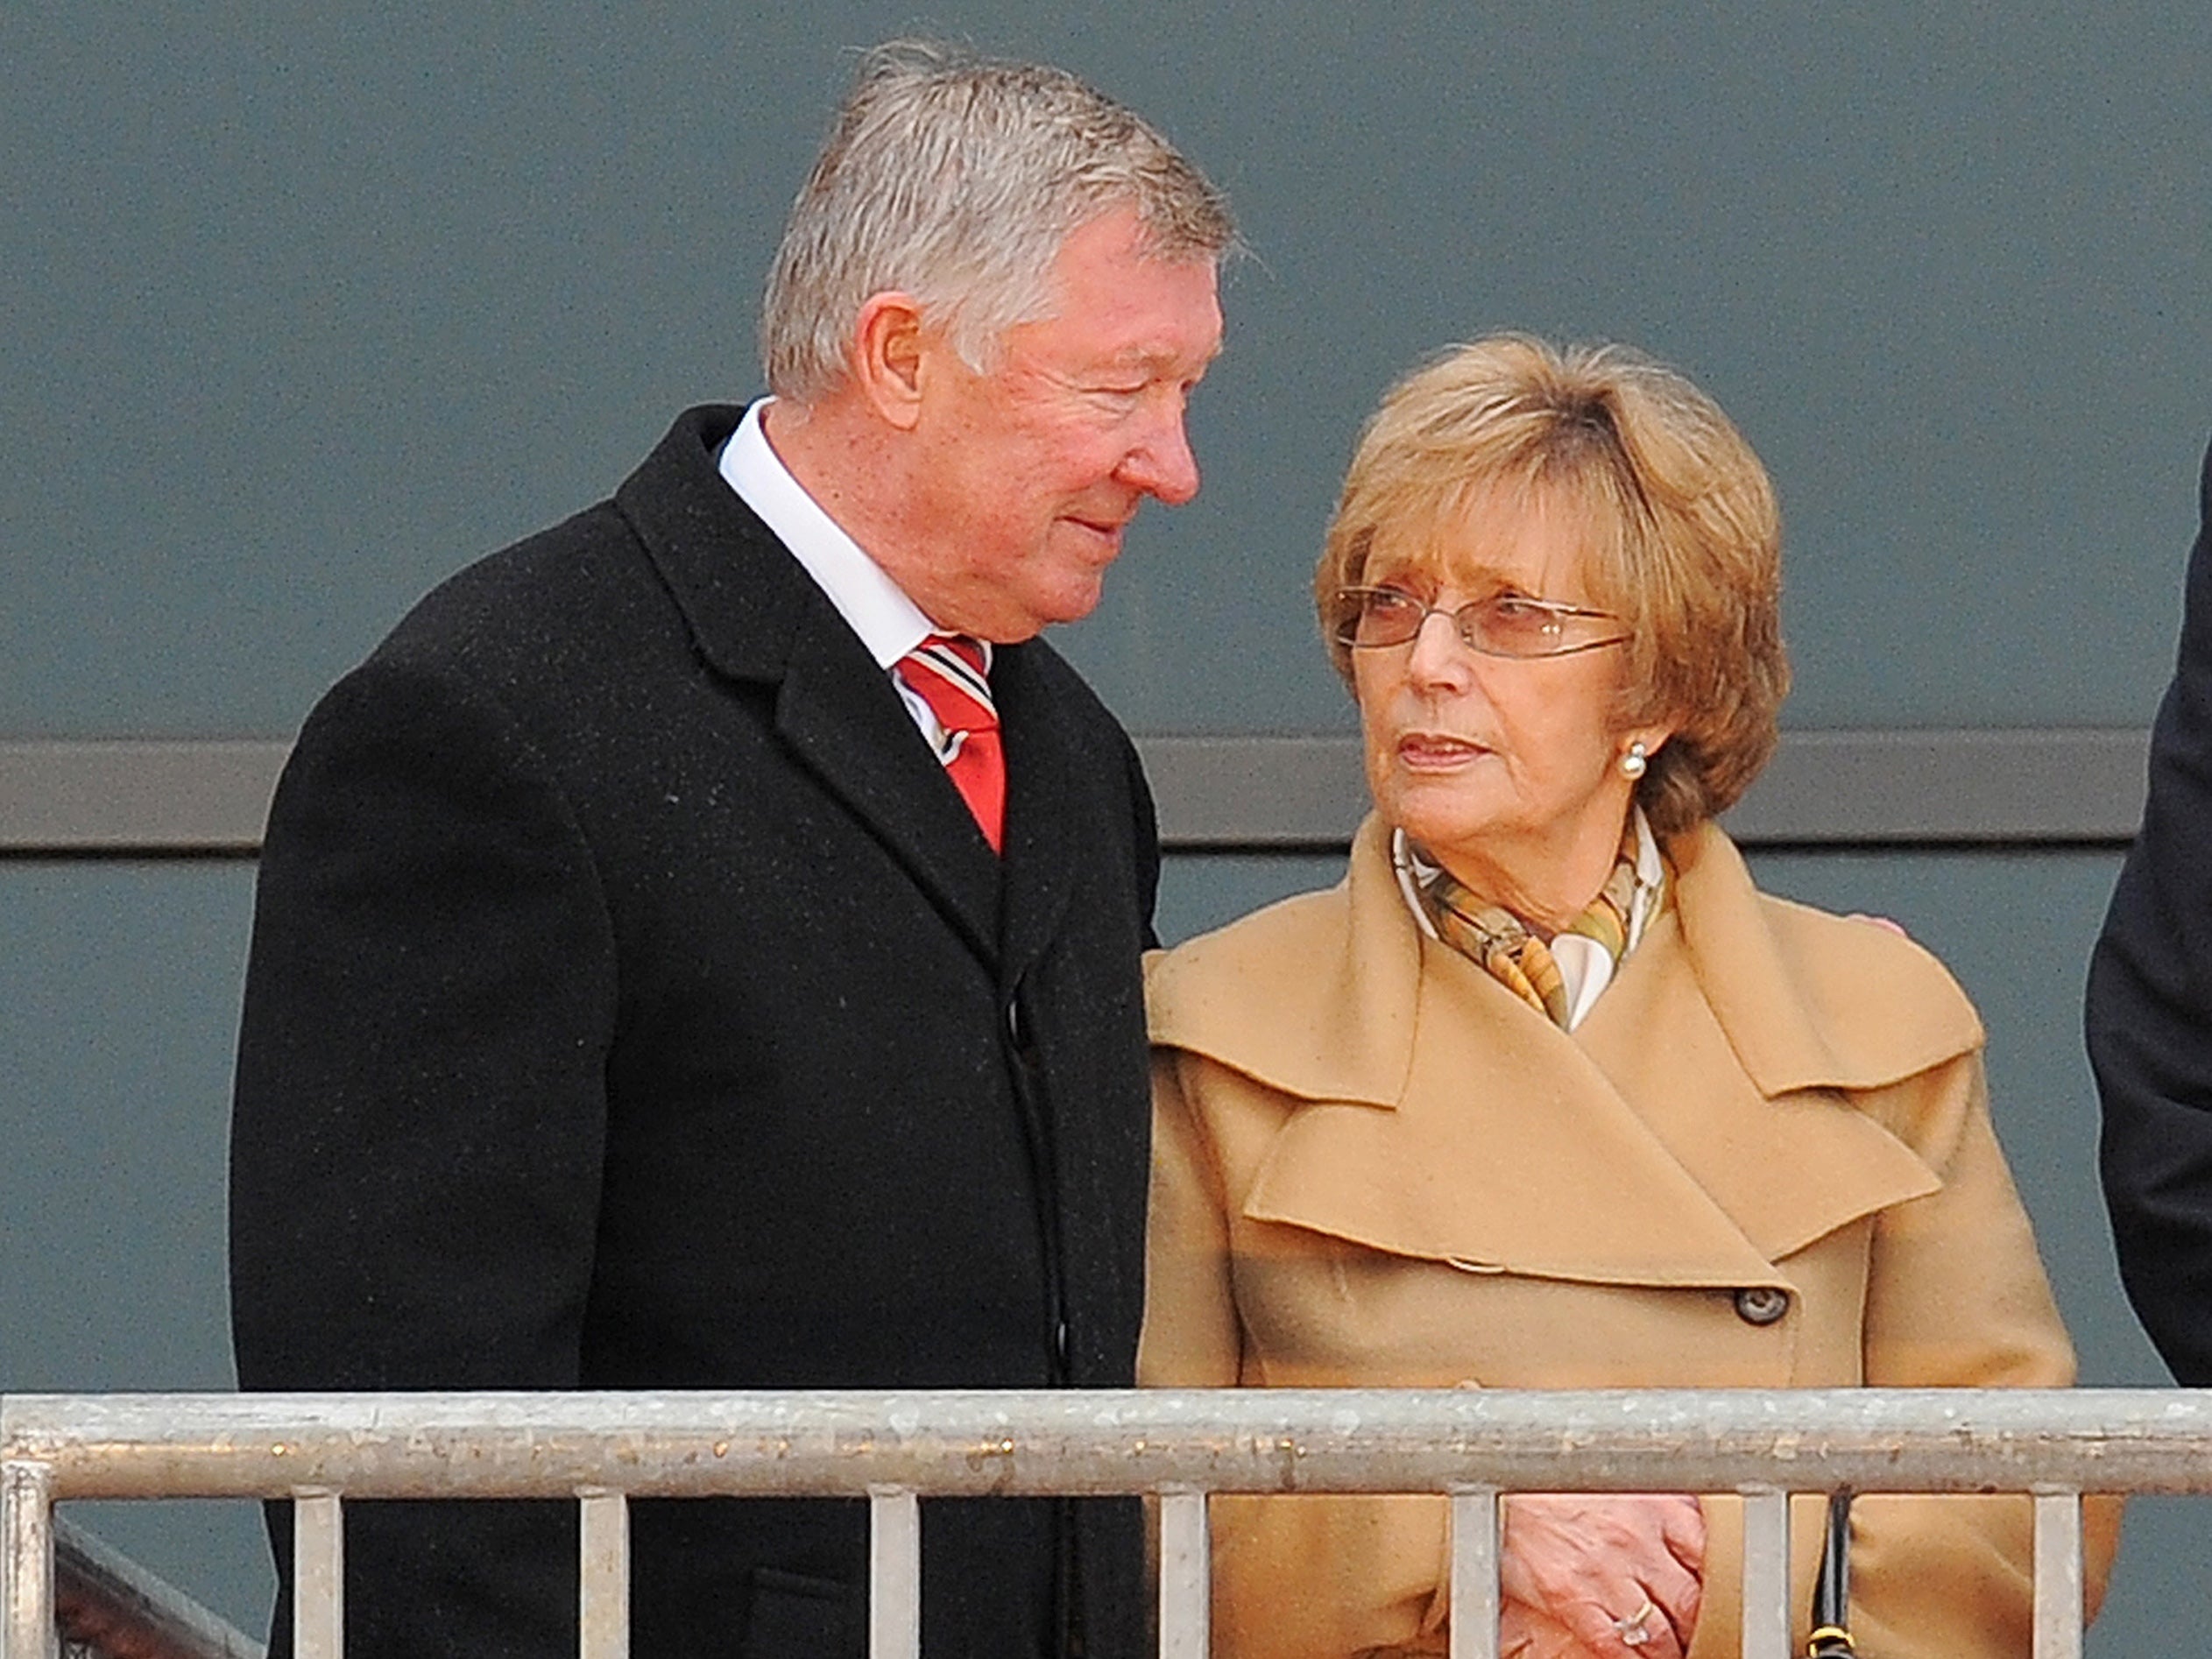 Sir Alex Ferguson said he needed to put his wife 'first' (Getty/AFP)